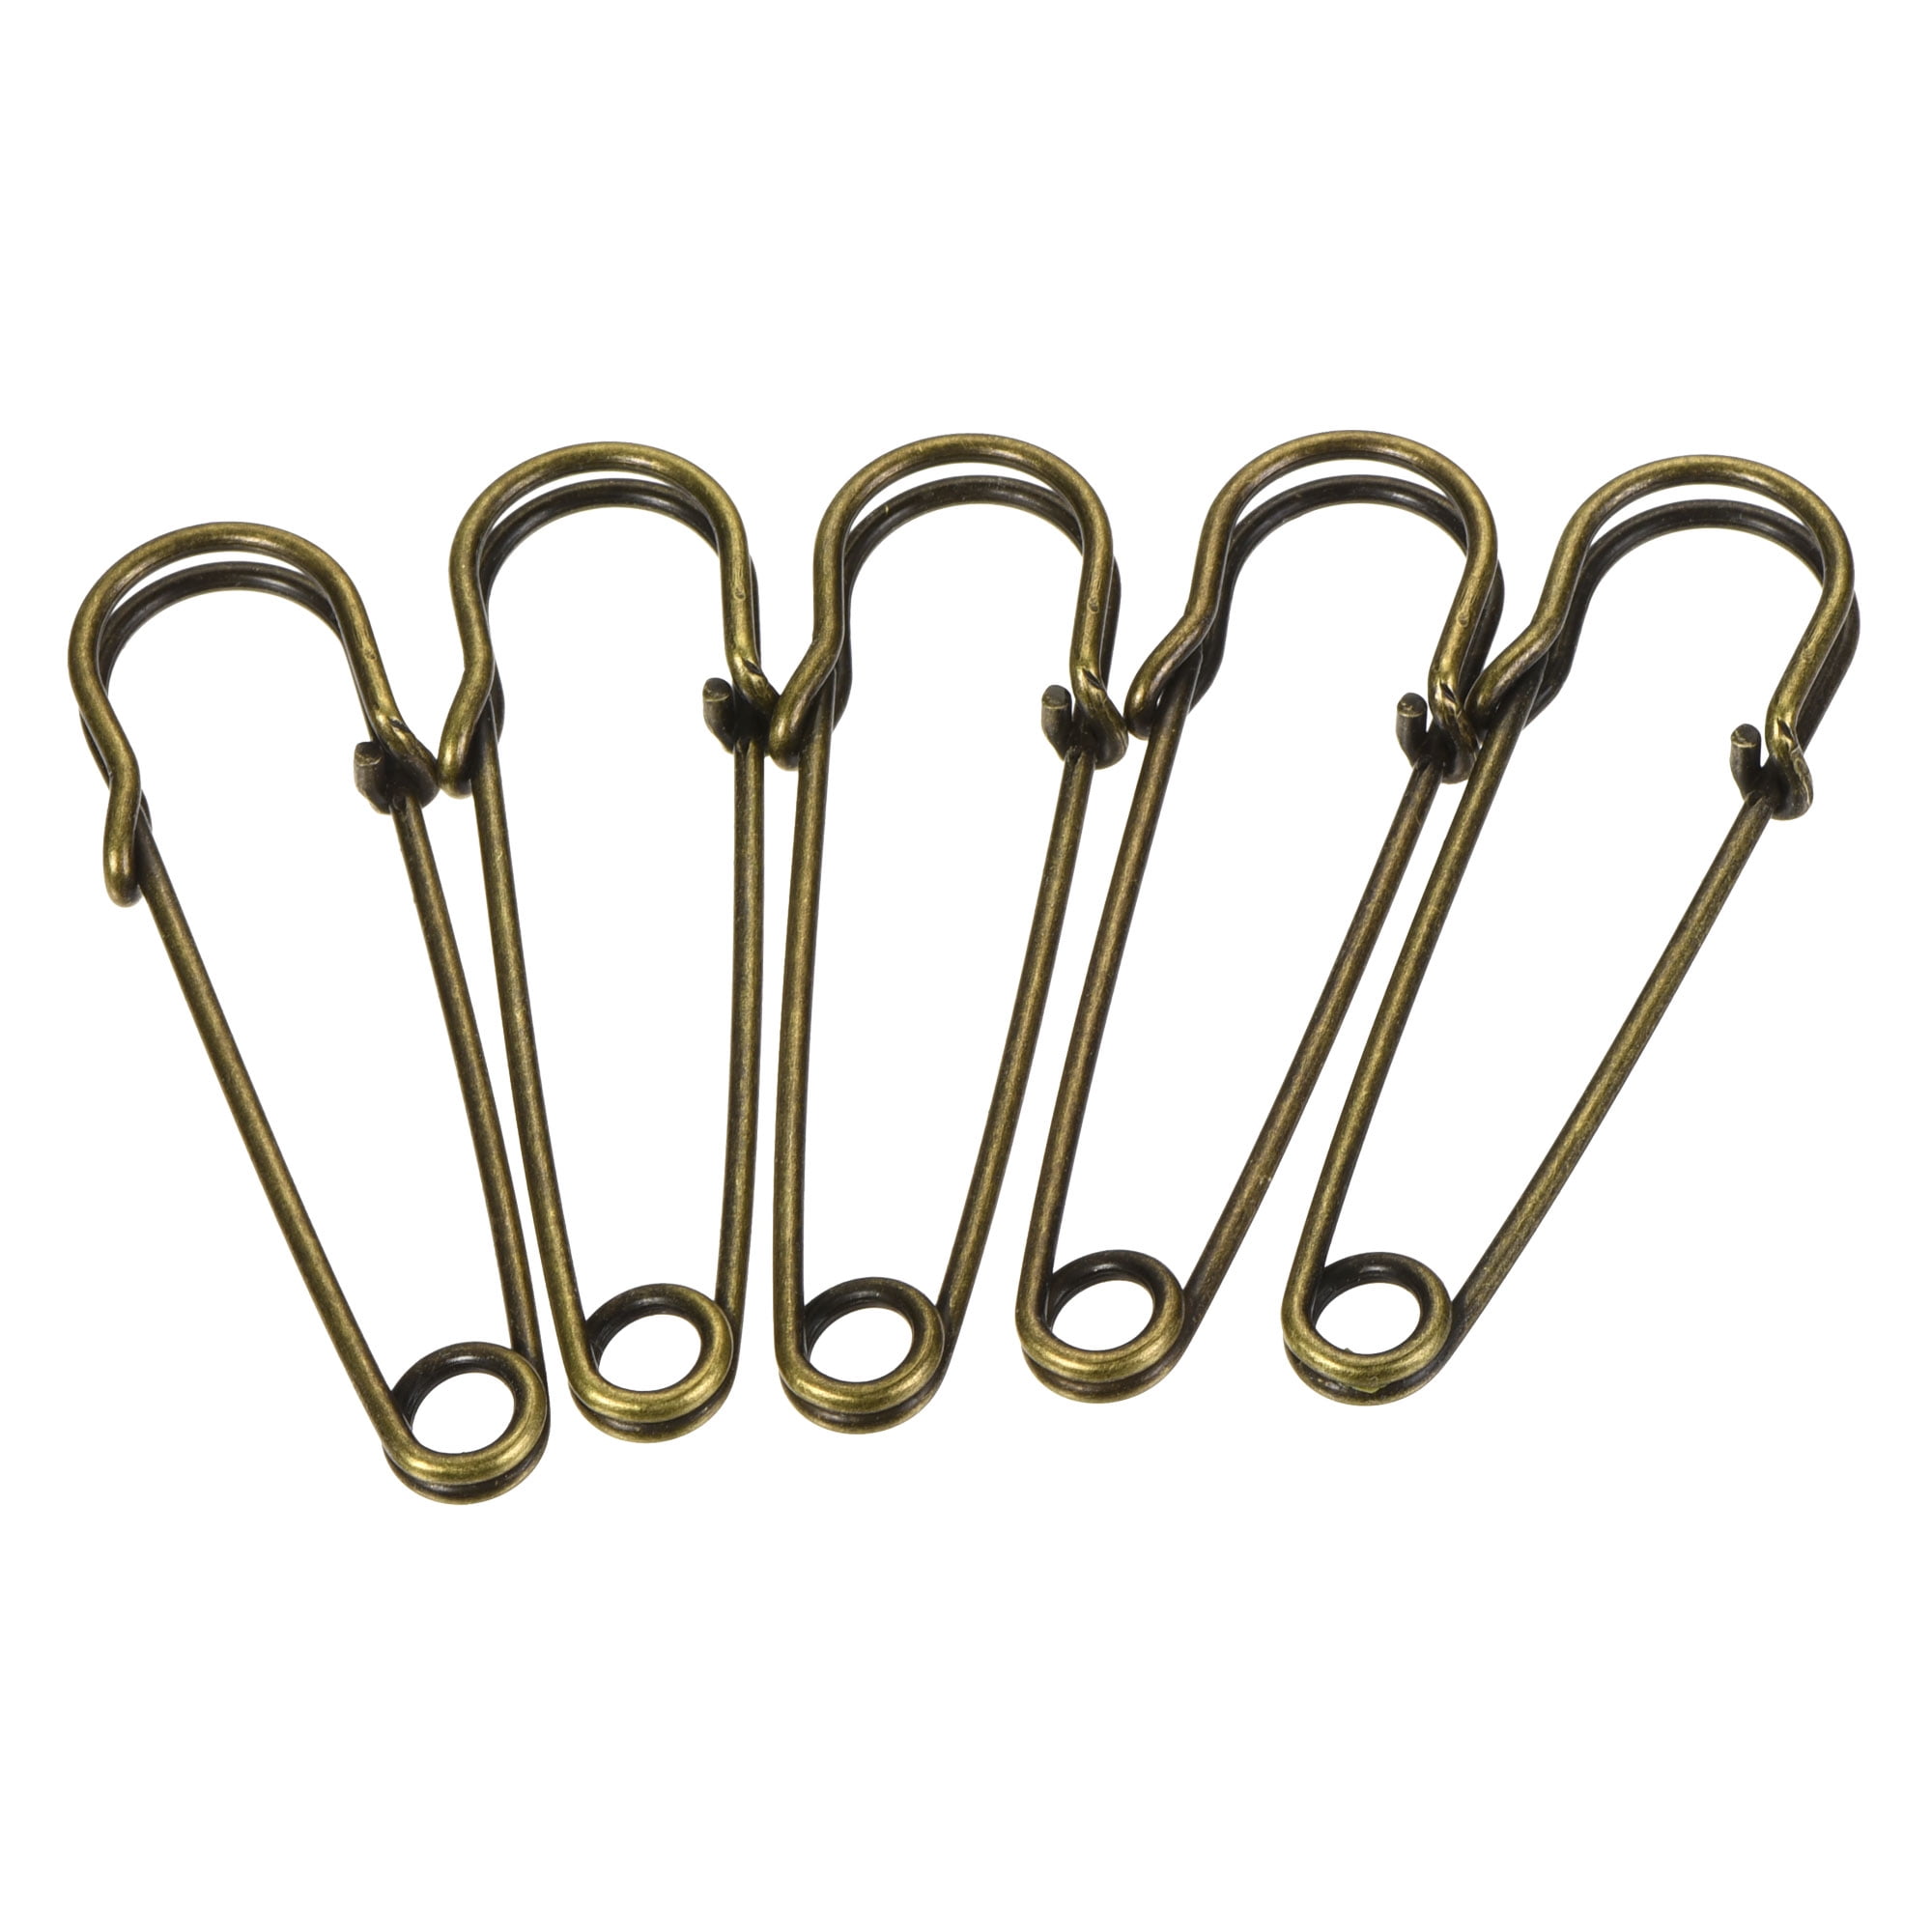 Uxcell 28mm/1.1 Inch Curved Safety Pins Metal Sewing Pins for Office Home  Gold Tone 100 Pack 